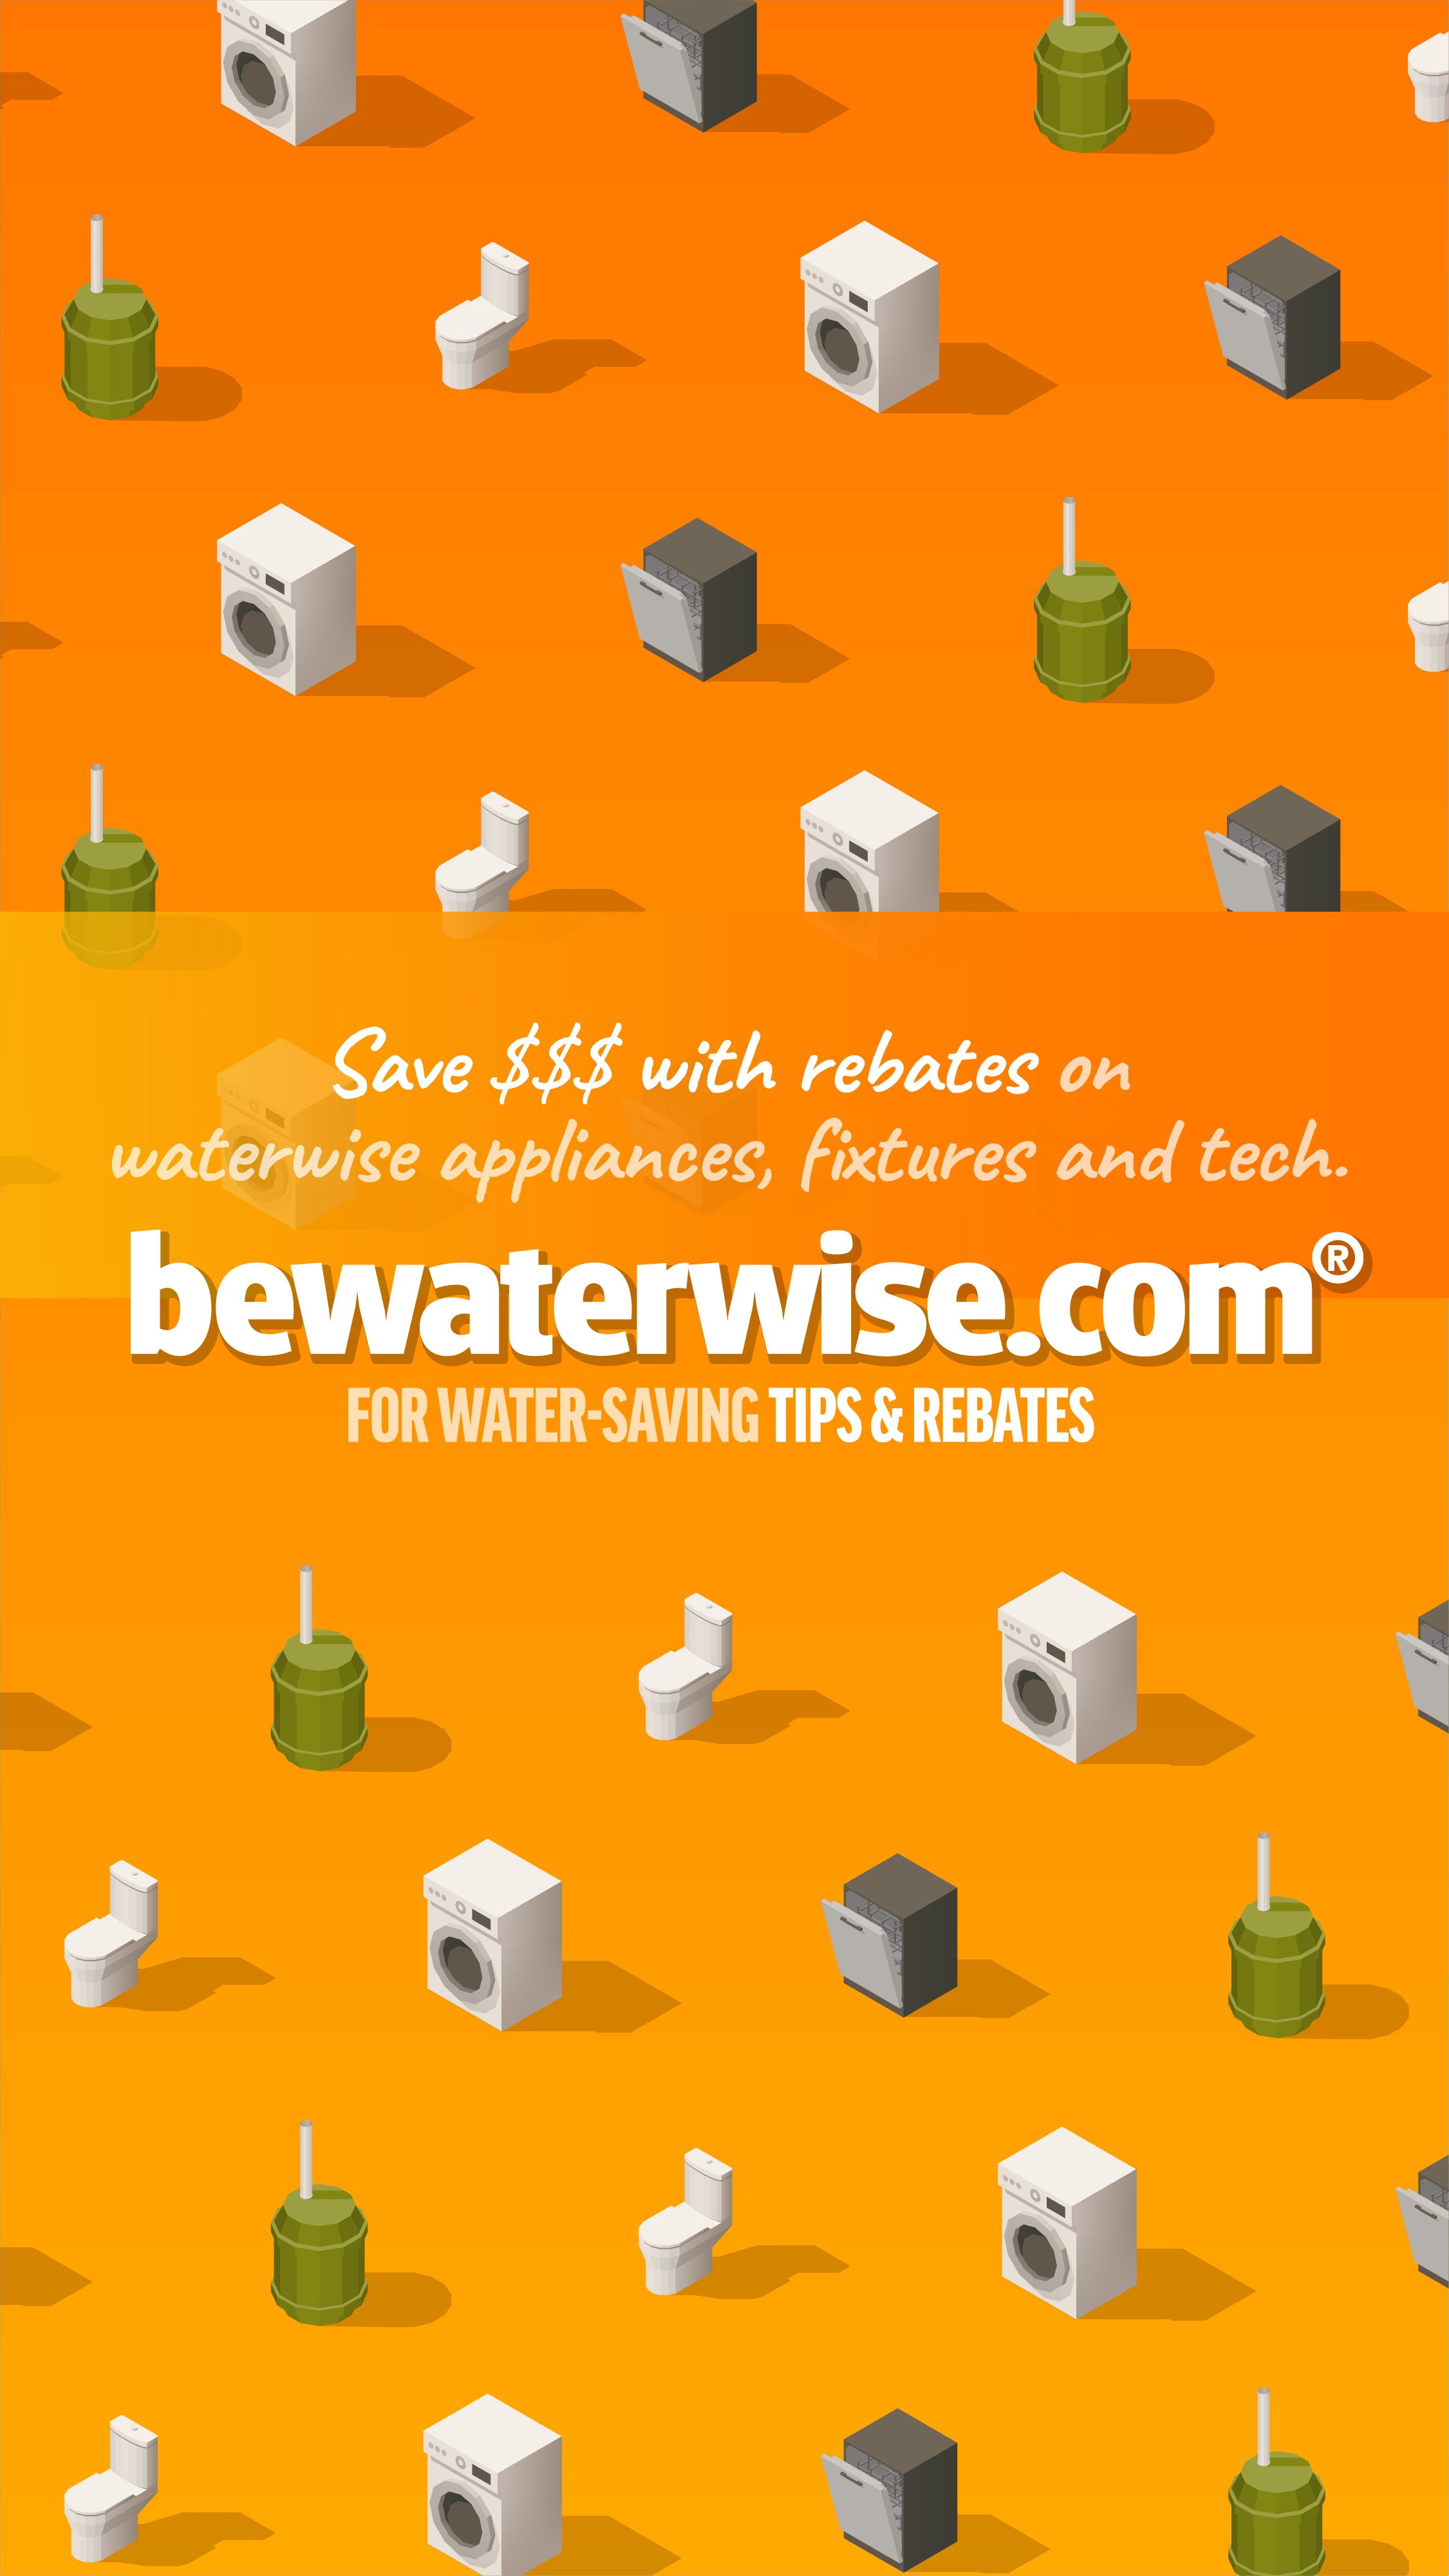 Bewaterwise.com Tips and Rebates